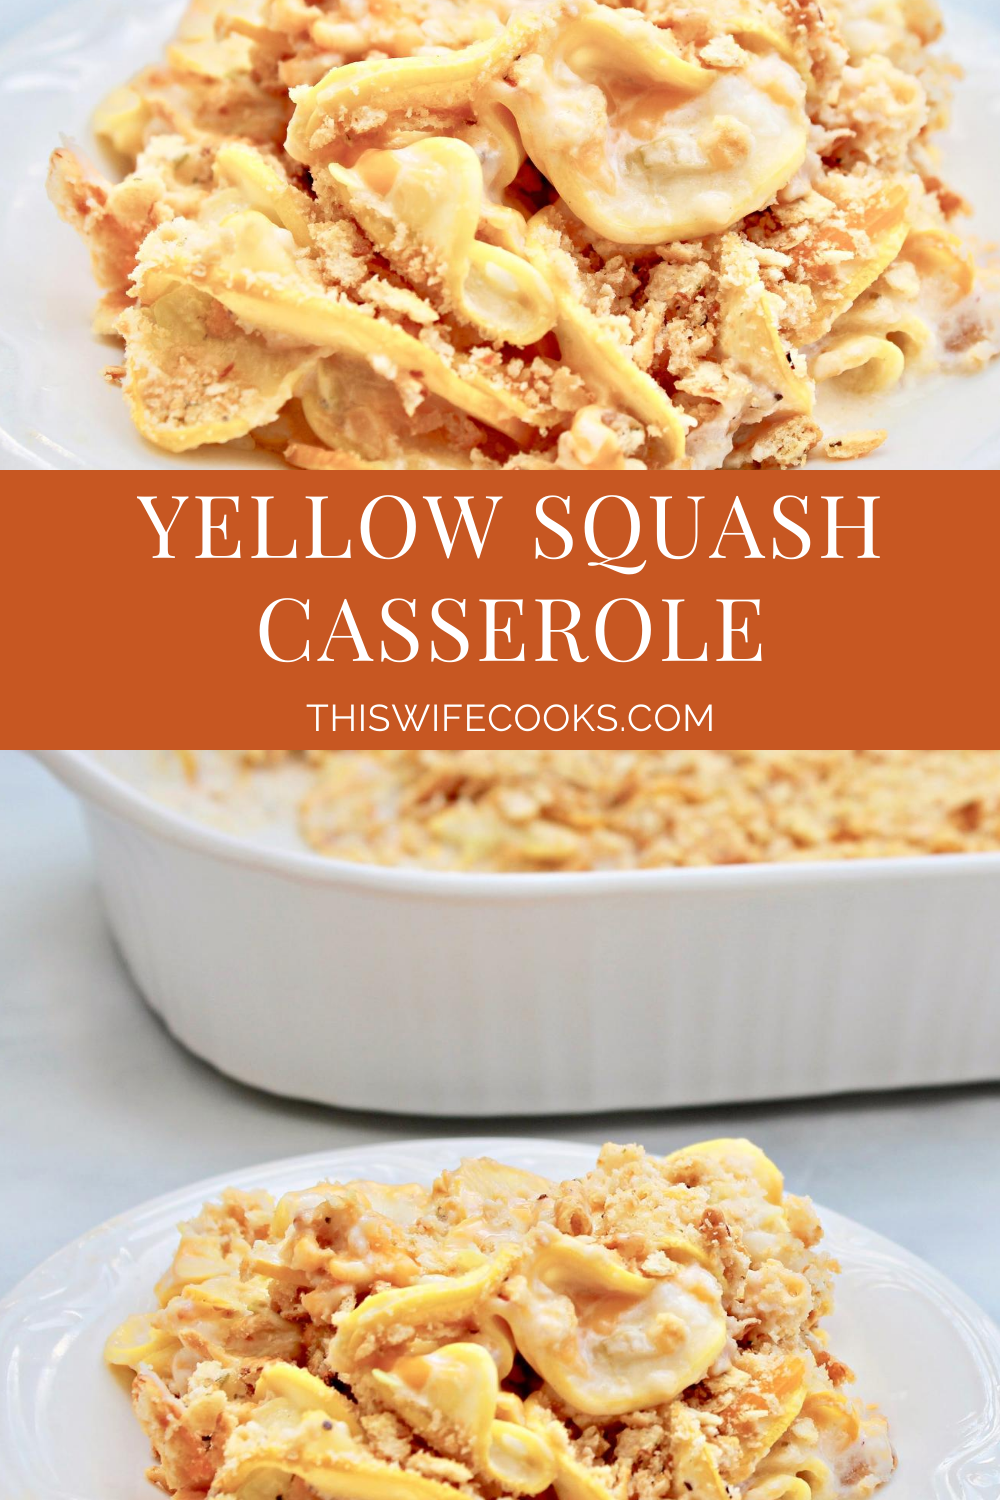 Yellow Squash Casserole ~ Sliced yellow squash baked in a creamy, cheesy sauce and topped with a simple and savory butter cracker crust. This Southern classic can be served as a main dish or side dish and is perfect for potlucks and barbecues. via @thiswifecooks